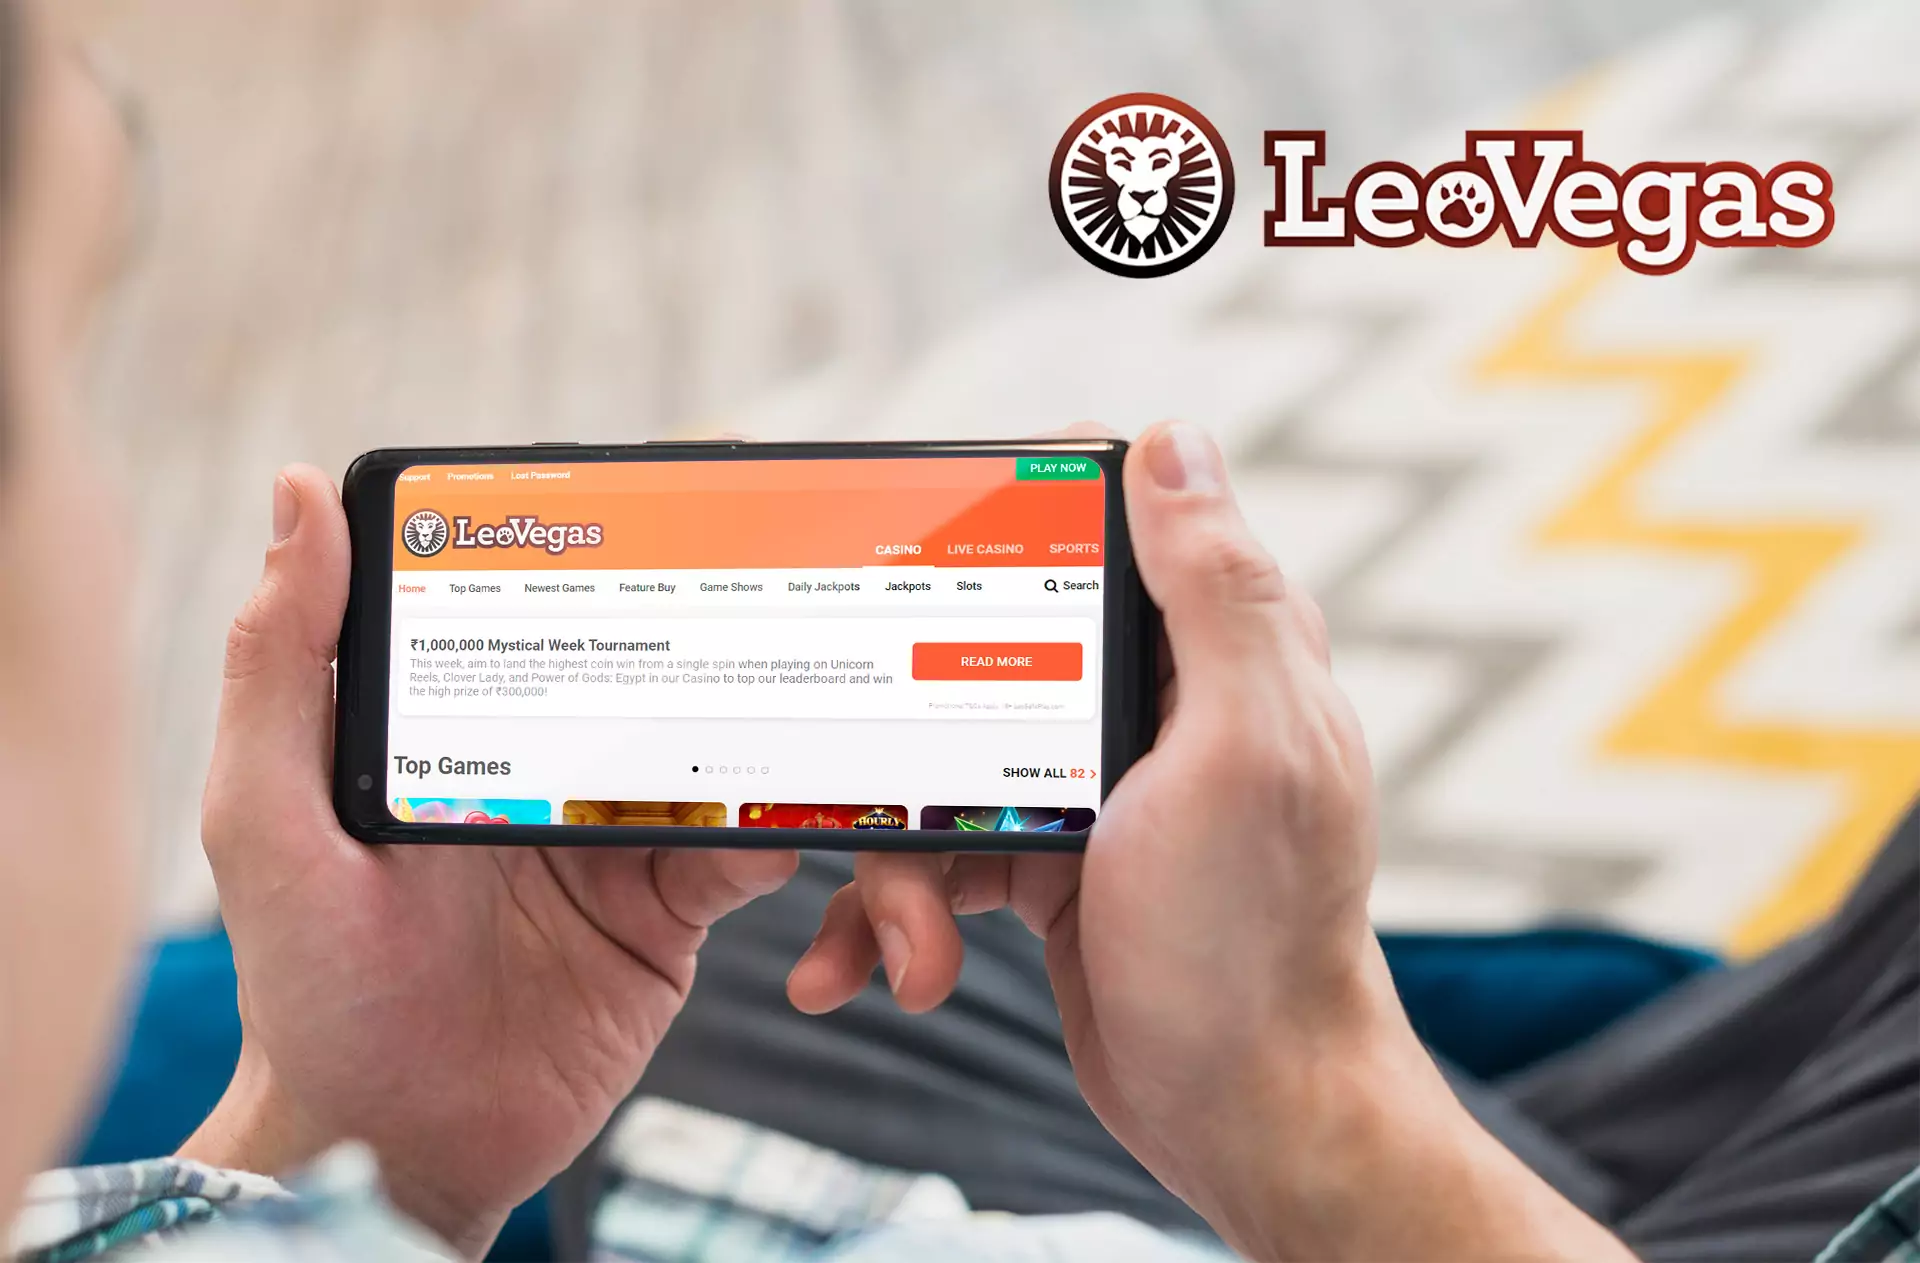 LeoVegas has a great mobile app that allows betting in IPL.